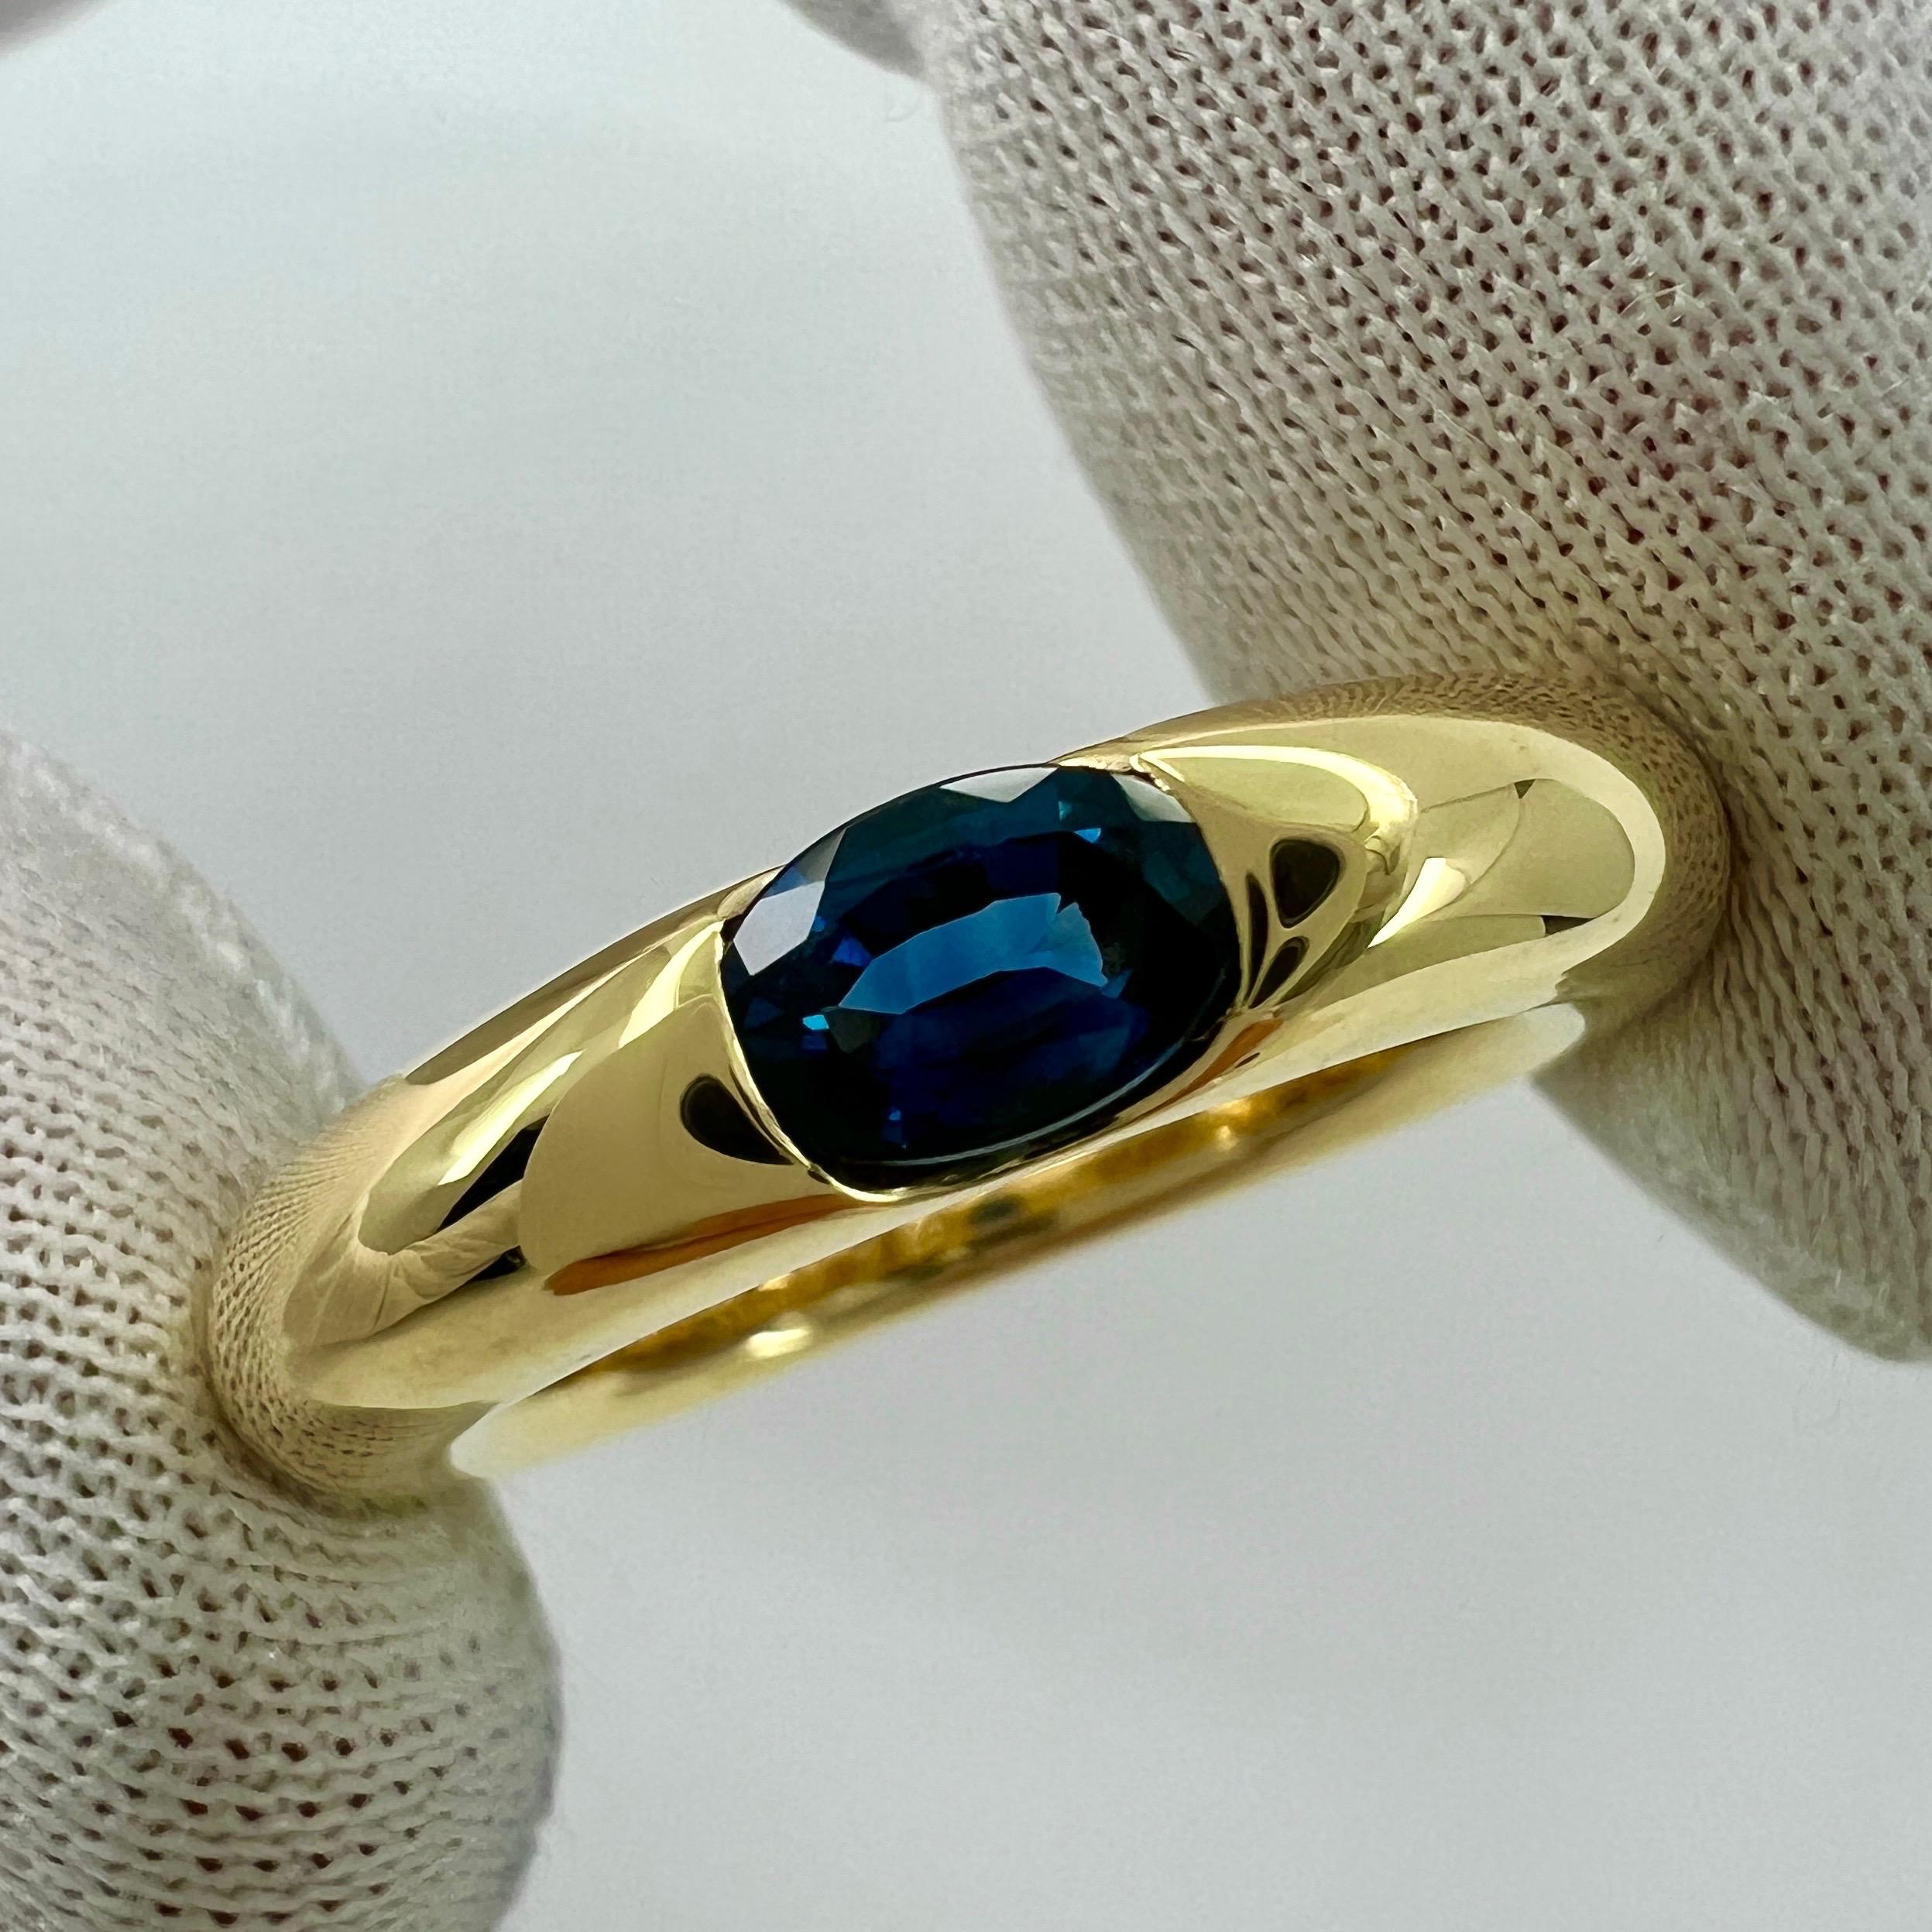 Vintage Cartier Blue Sapphire Oval Ellipse 18k Yellow Gold Solitaire Ring US5 49 For Sale 6